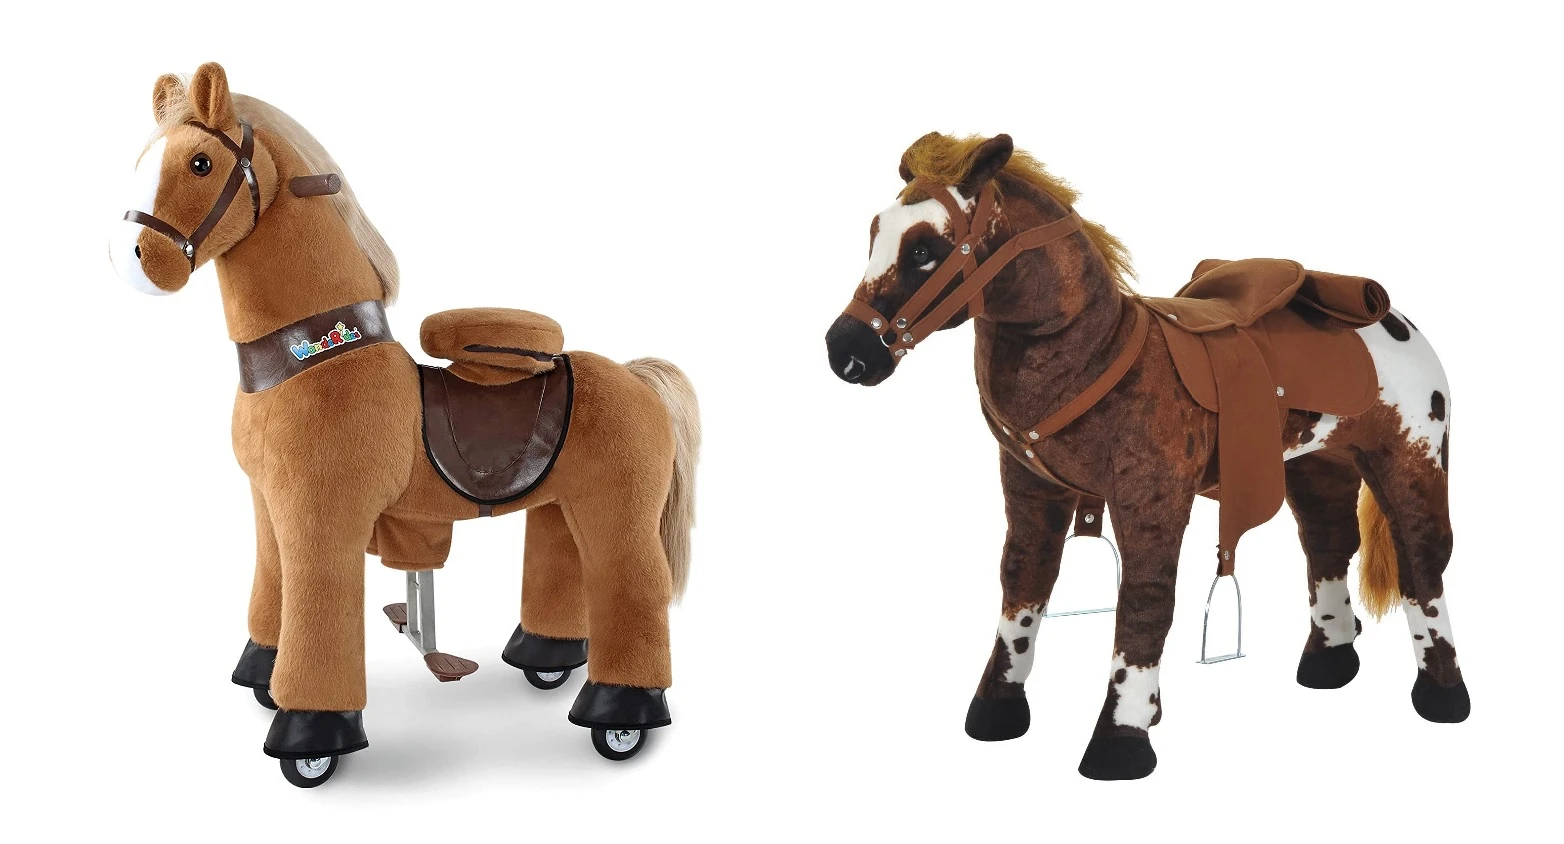 8 Best ride on horse toys for kids